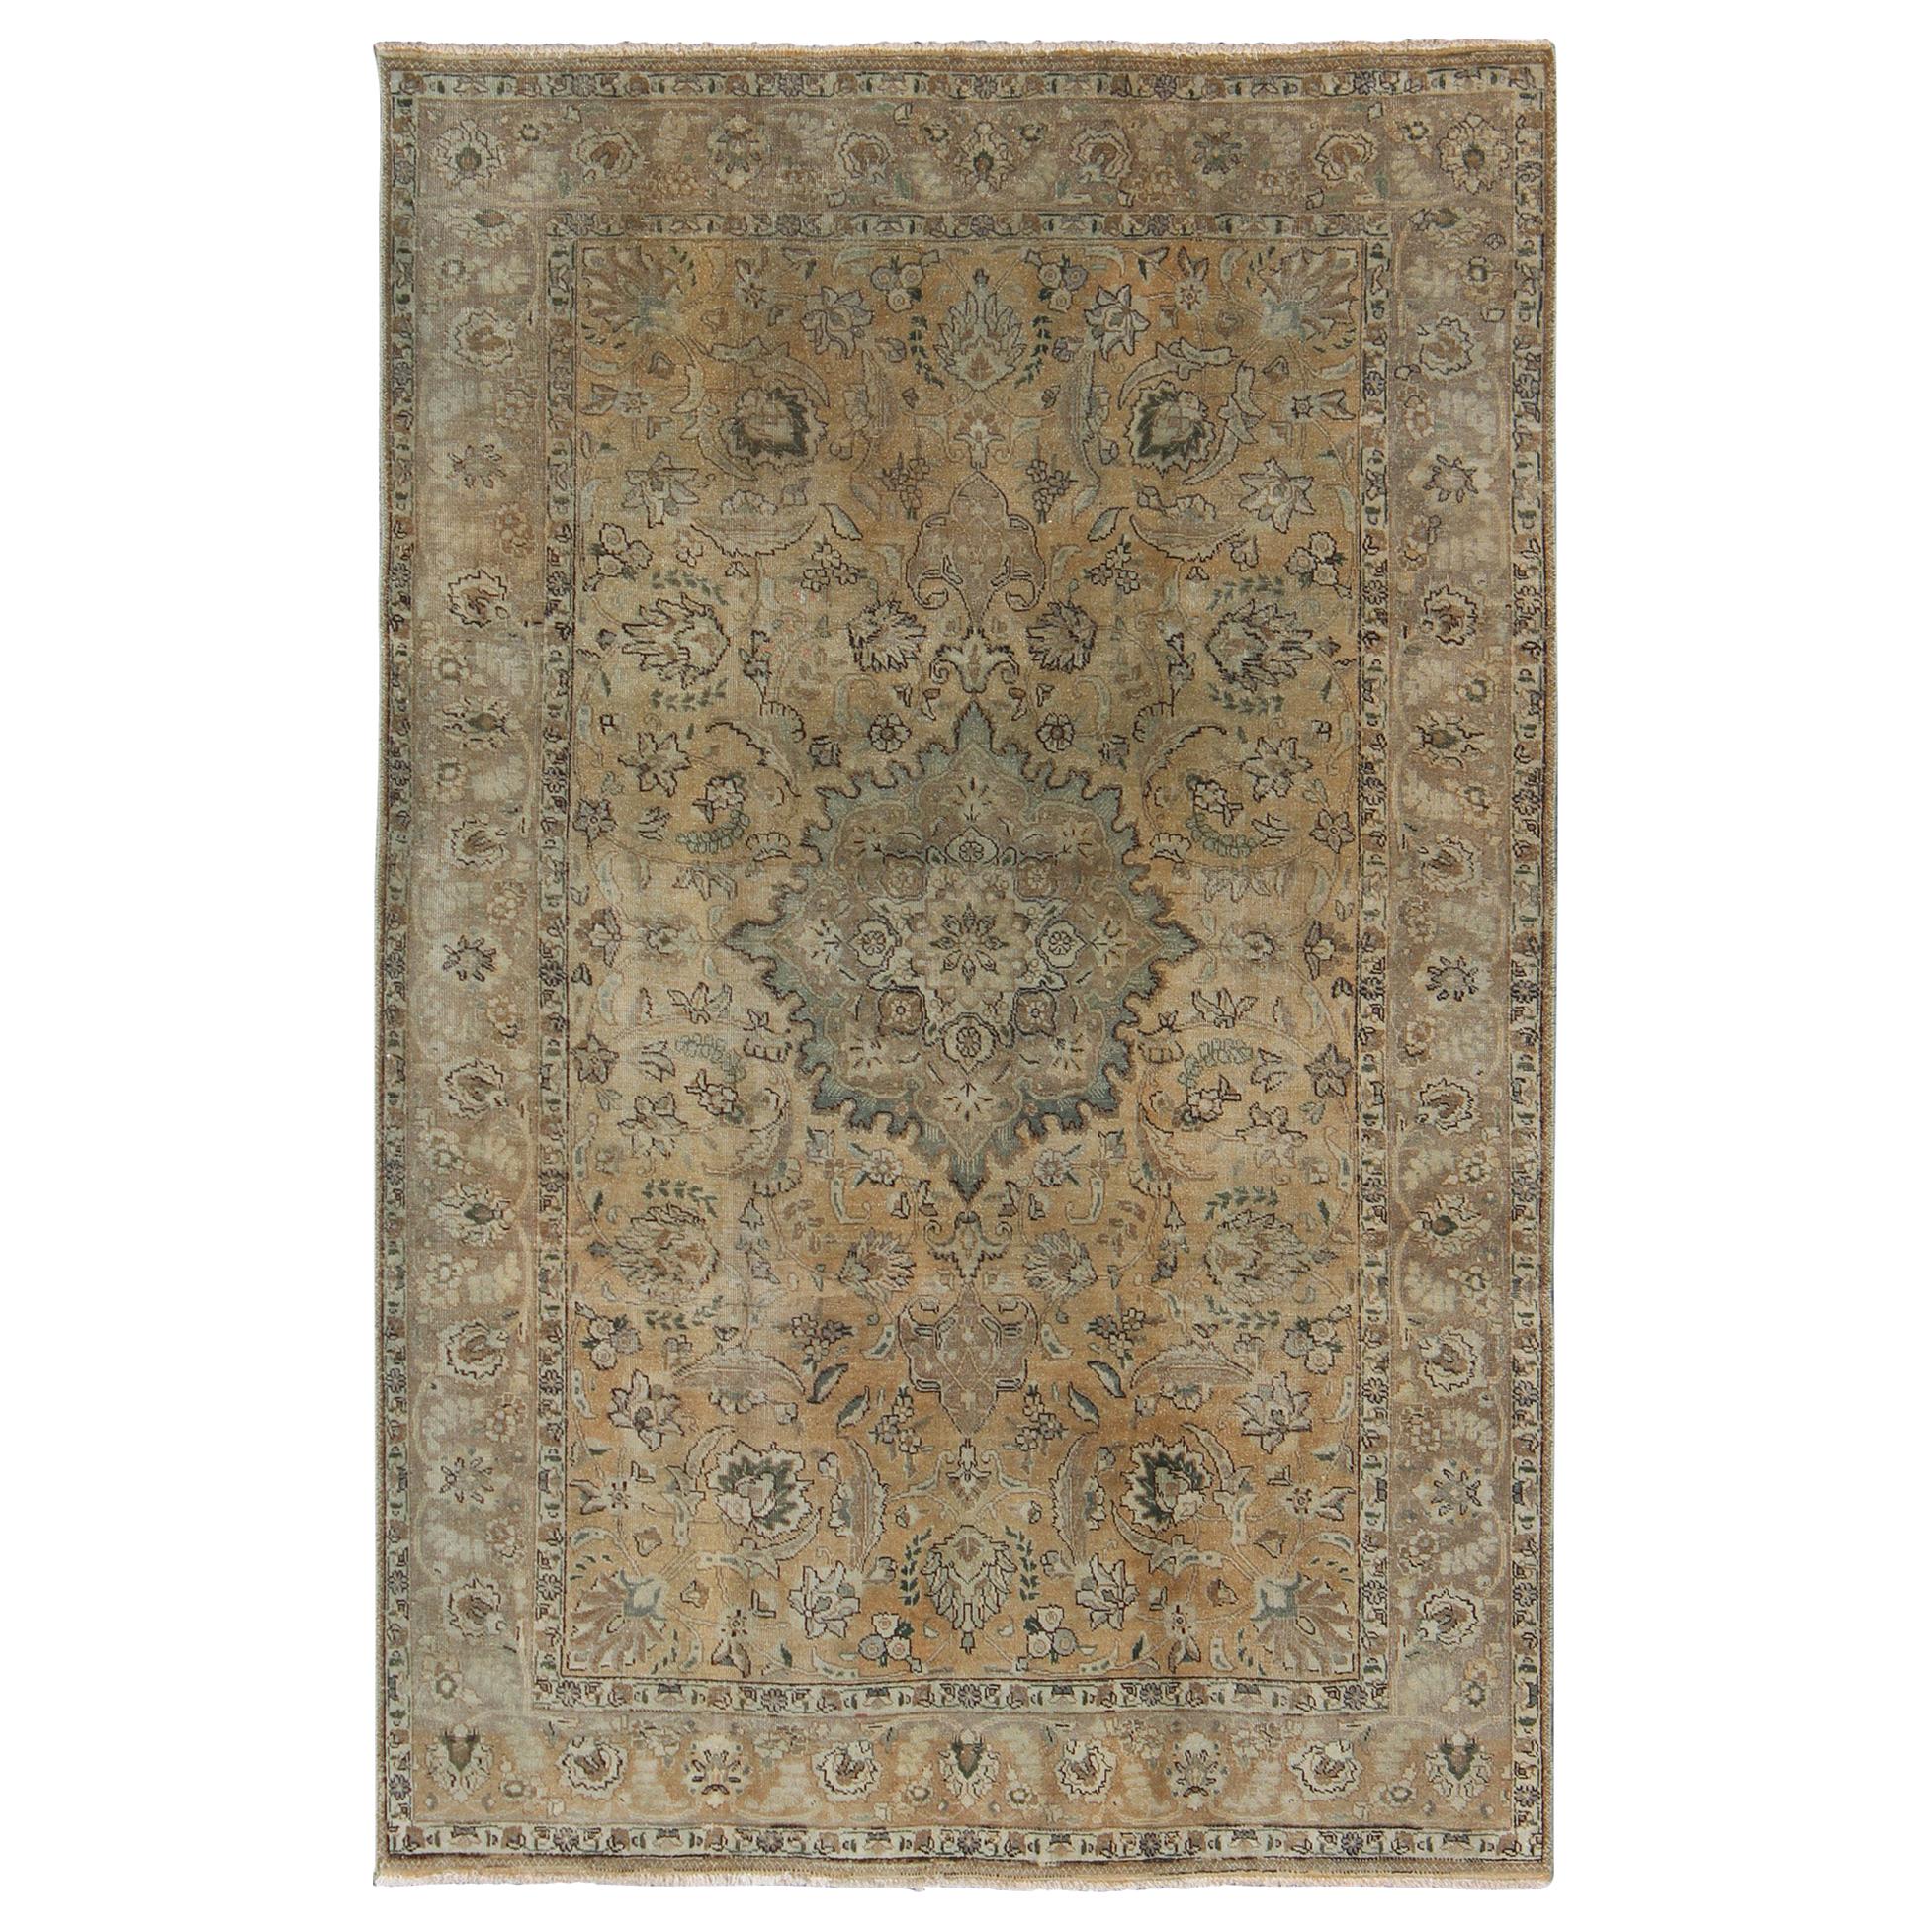 Shades of Tan, Taupe, Cream and Vintage Persian Tabriz Rug with Medallion Design For Sale